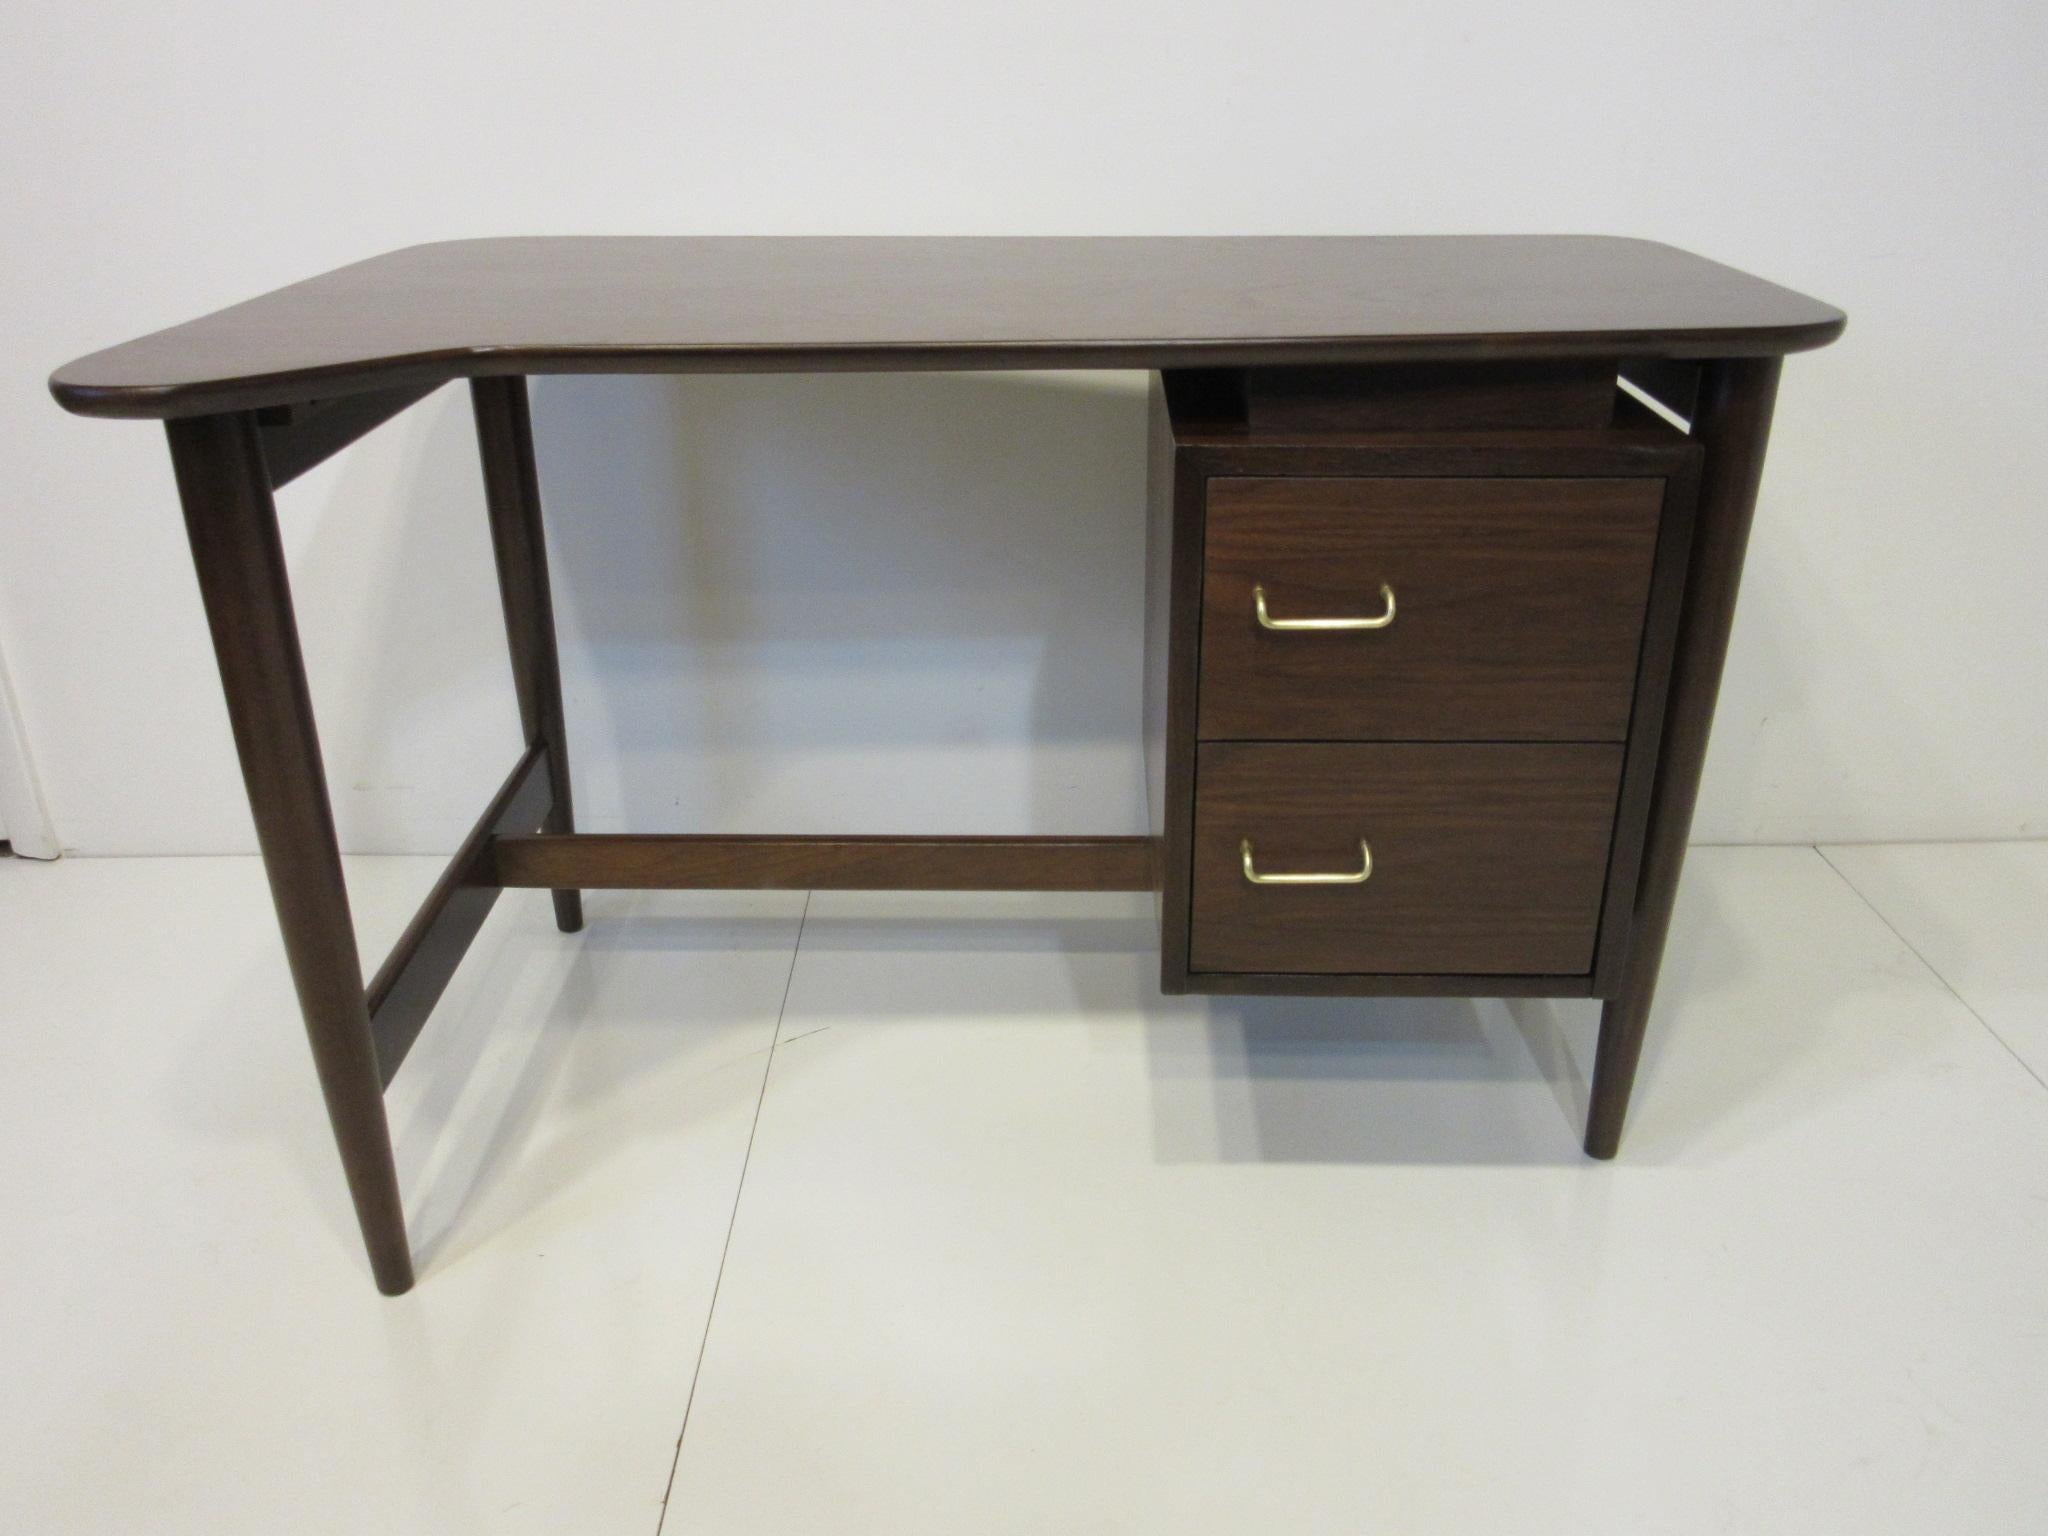 A nice smaller sized walnut desk with a sculptural styled top having two drawers with brass handles, the desk has a wonderful feel for a smaller space. Manufactured by the American of Martinsville Furniture Company, the measurement for the desk top